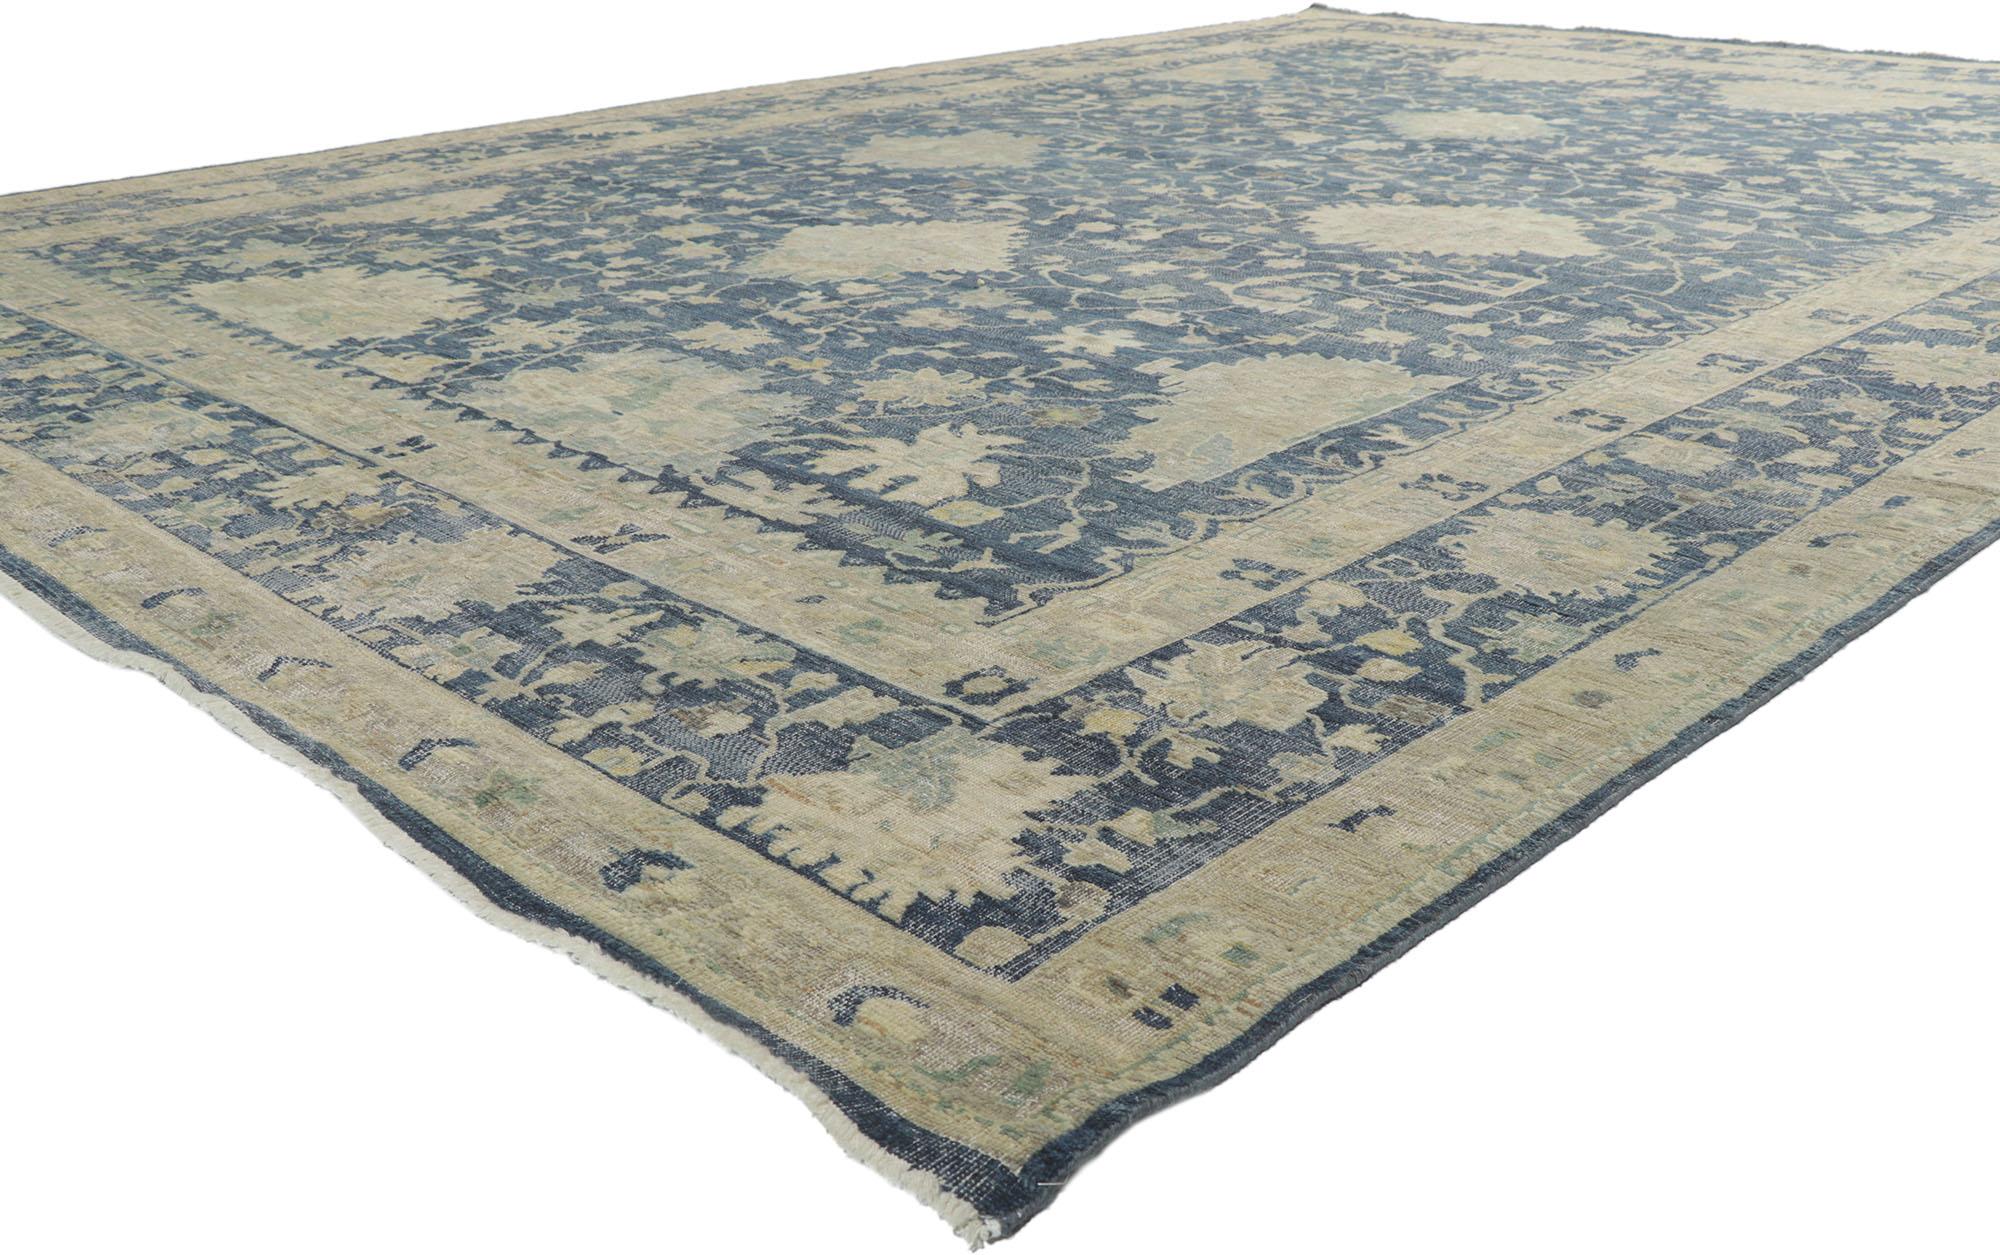 30711 new Contemporary distressed rug, 09'08 x 13'09. With its blue hues and weathered beauty, this new contemporary distressed rug creates an inimitable warmth and calming ambiance. The geometric botanical pattern and rich waves of abrash woven